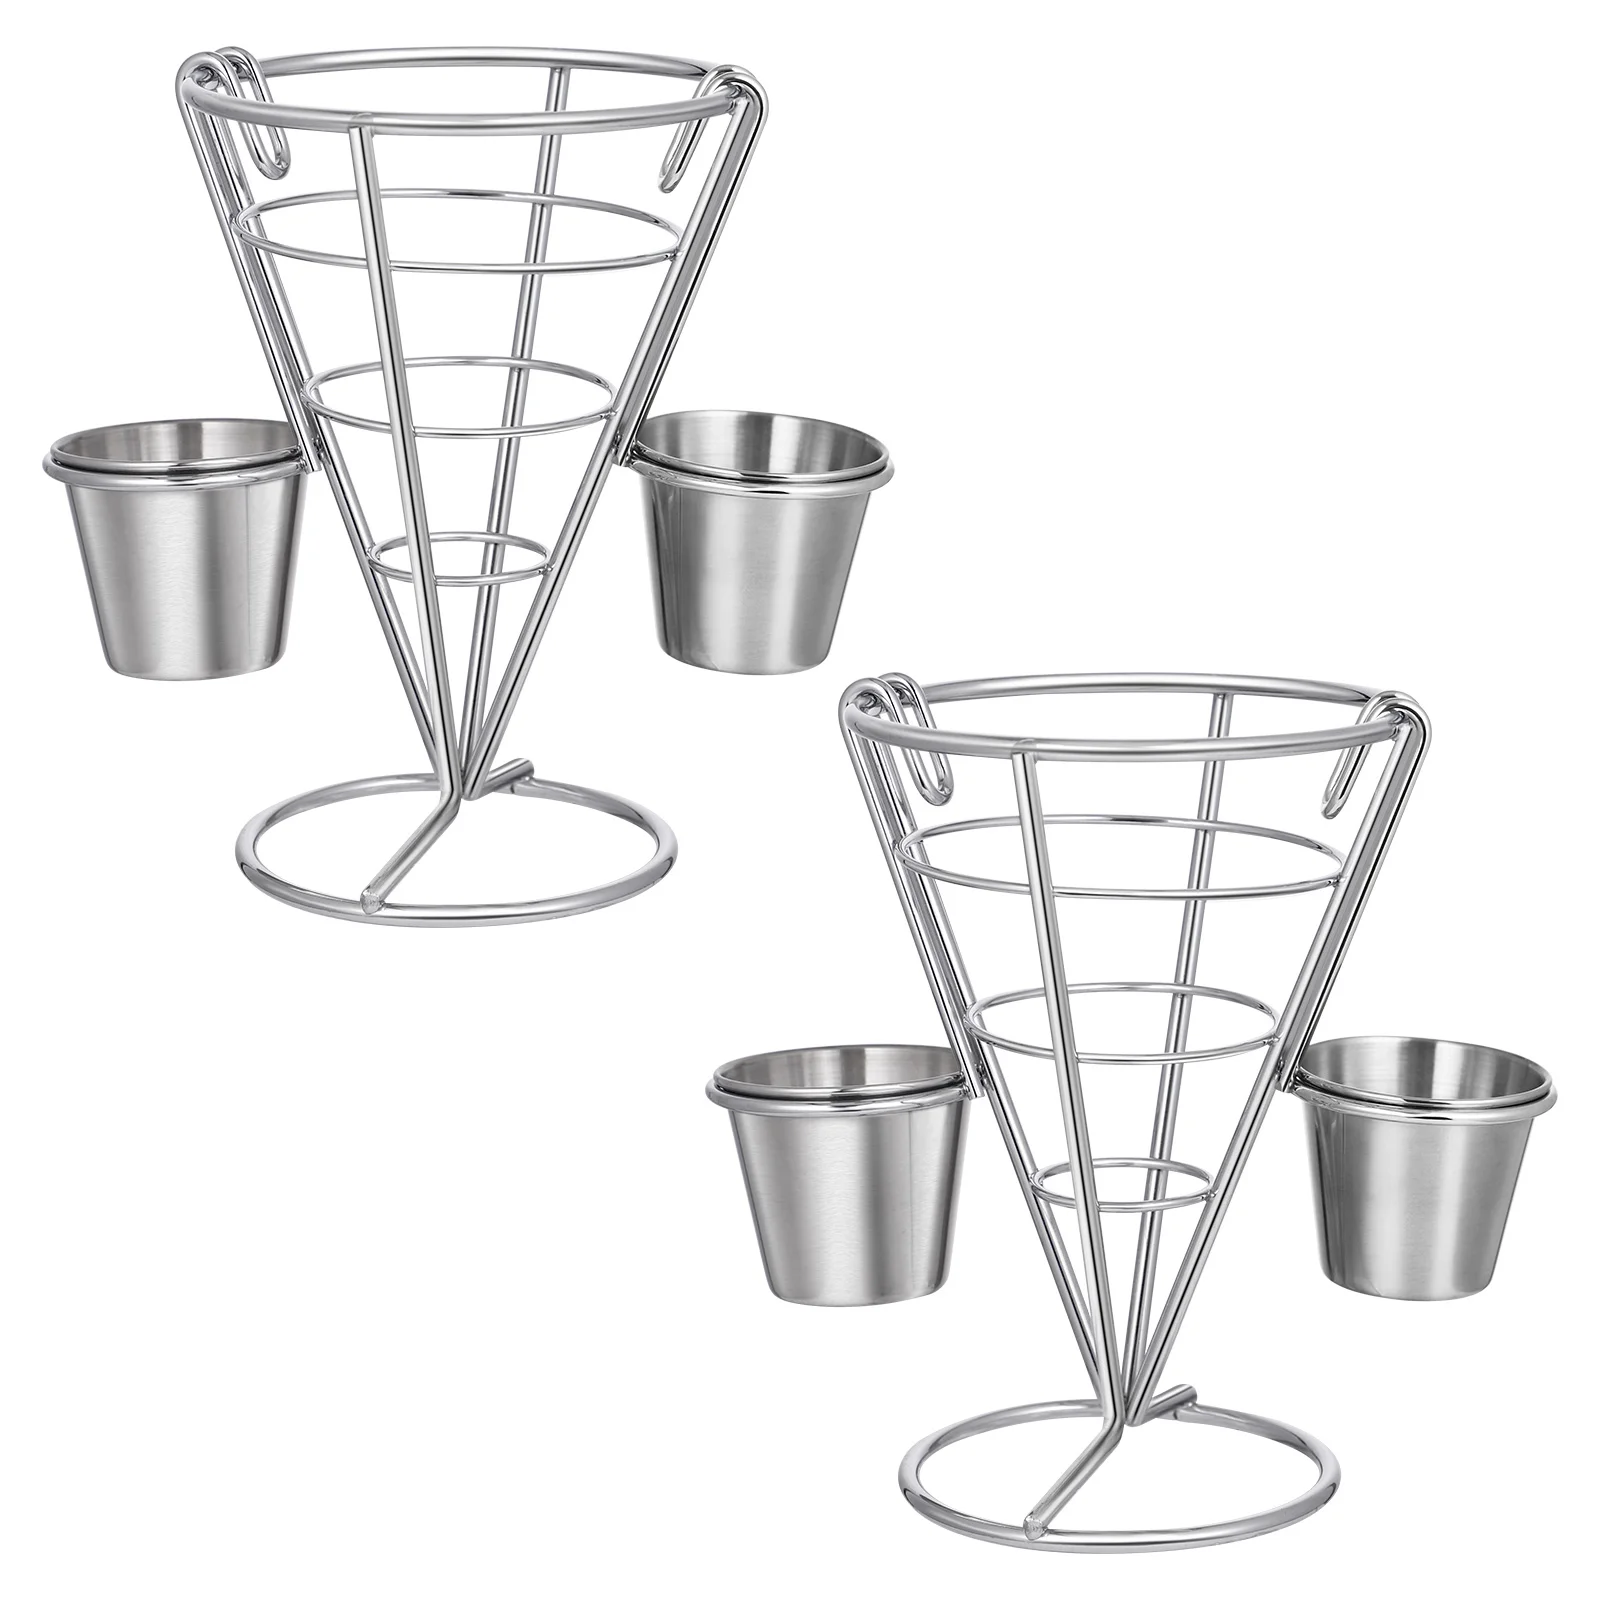 Hemoton 2pcs French Fries Stand Cone Baskets Fry Holders with 2 Dip Dishes Snack Appetizer Serving Rack Food Display Wire